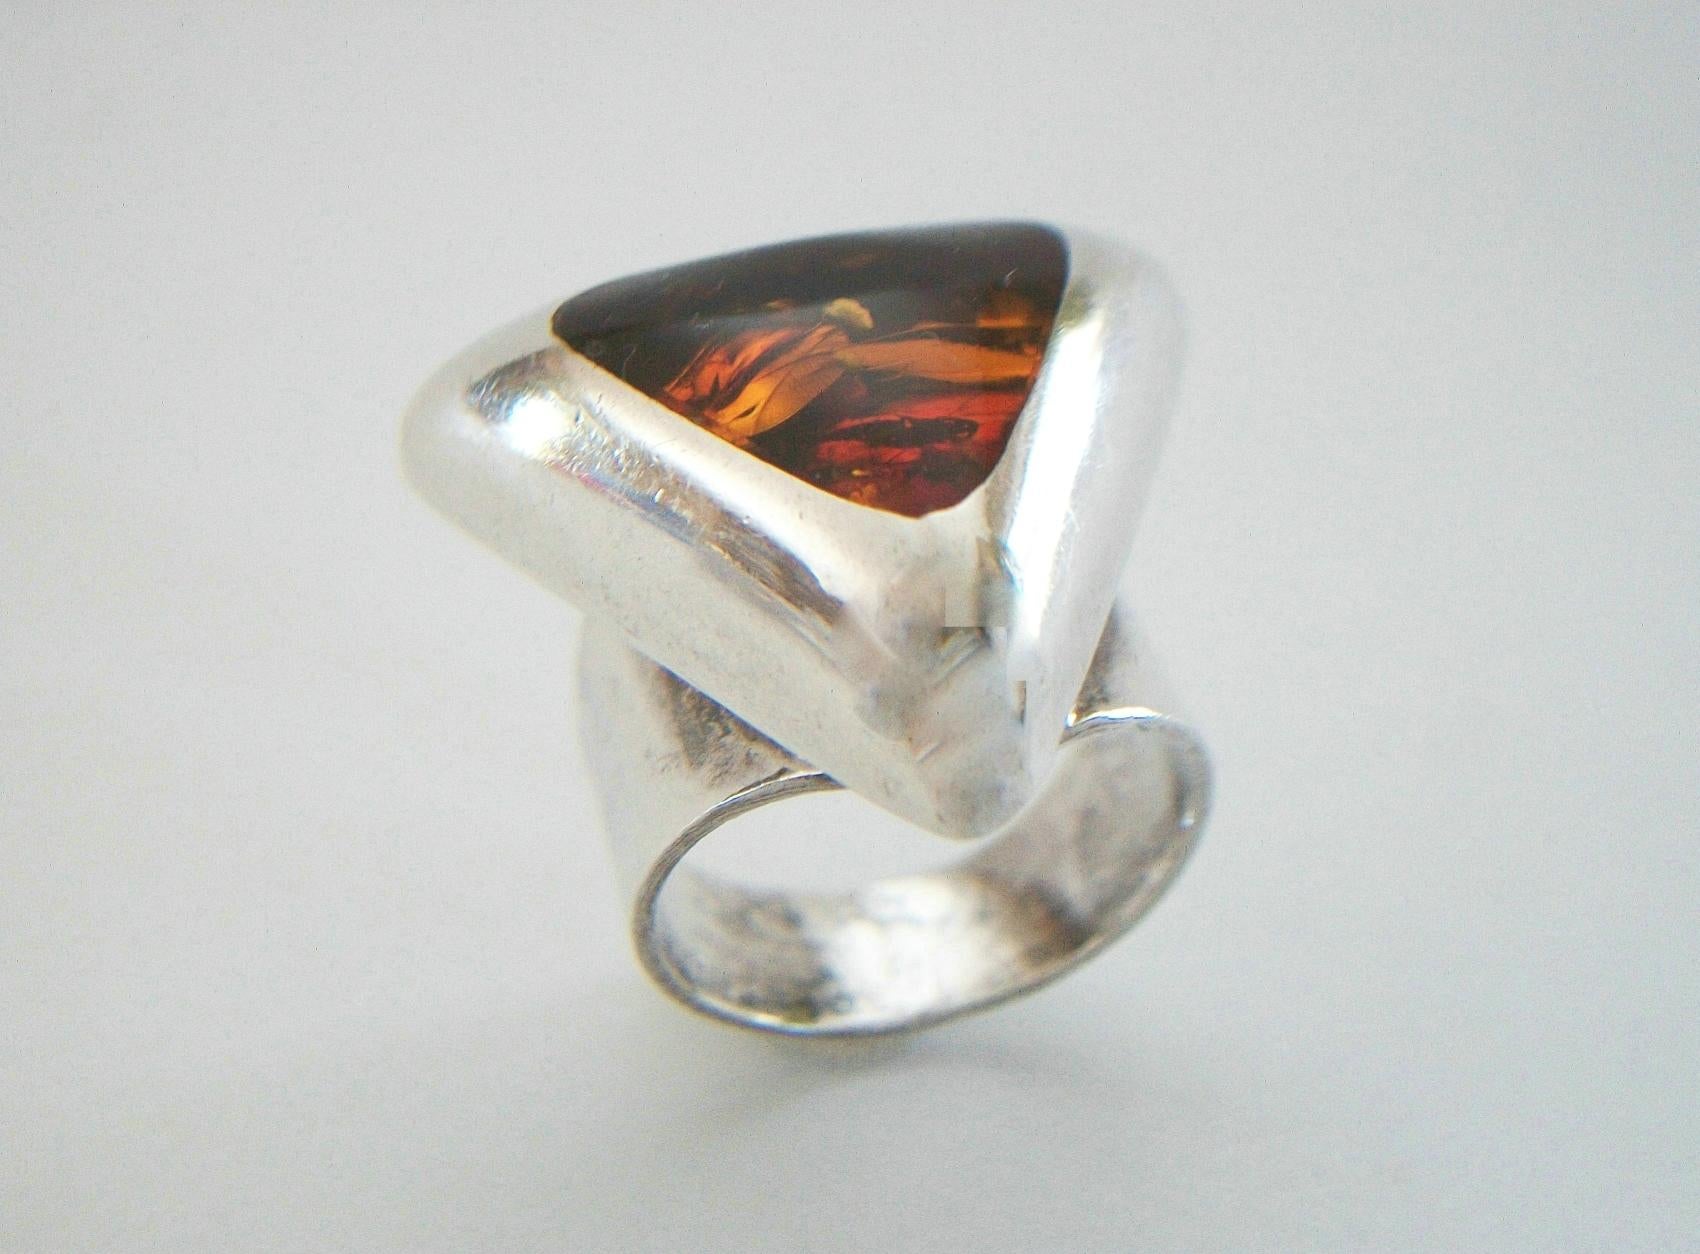 Modernist Baltic amber and sterling silver ring - bold style - wide band - flush mount amber setting (trilliant cut cabochon with domed and polished finish - approx. 3.8 carats - 15 mm. Wide x 15 mm. High) - hallmarks to the back of the band -